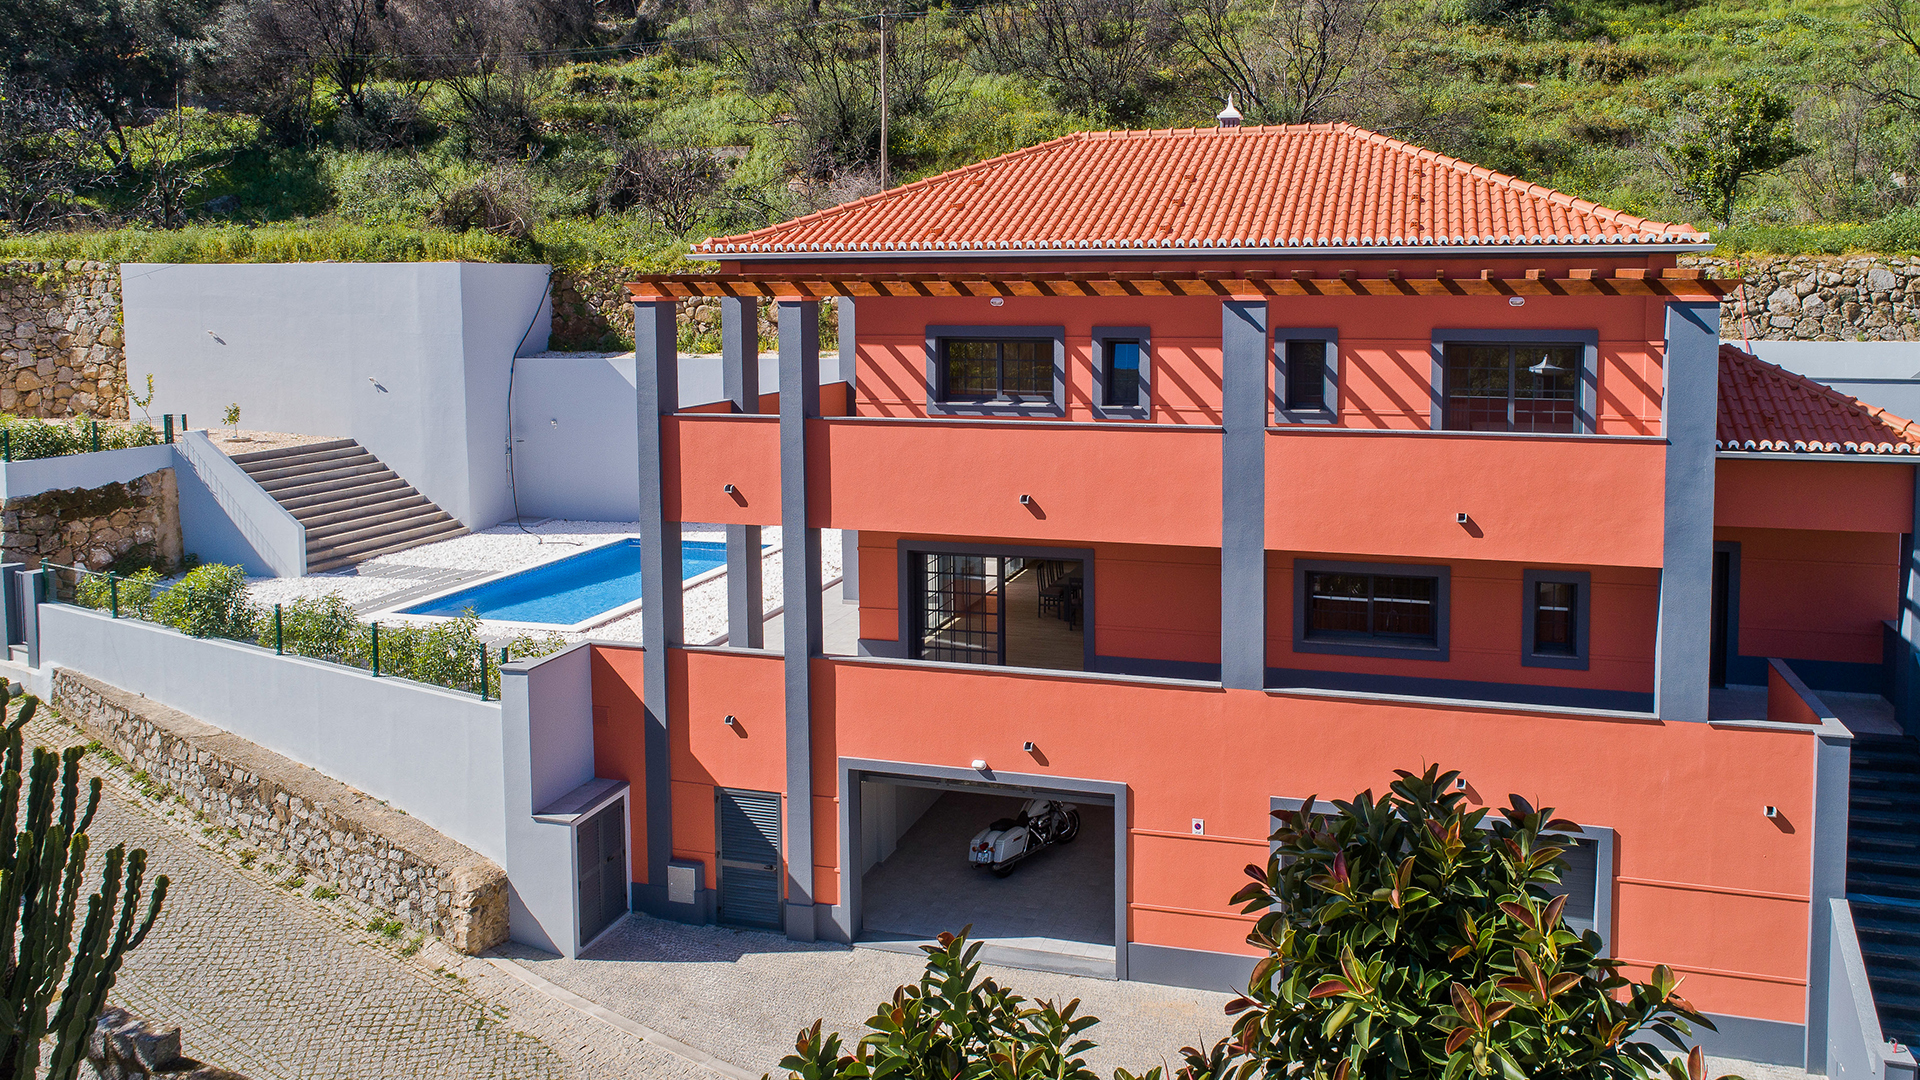 New 3 Bedroom Modern Villa in Caldas de Monchique, West Algarve | LG1619 This is a turnkey, high quality, brand new 3 bedroom villa with pool on the edge of the famous Caldas de Monchique health spa hamlet, with green views all around and amenities on the doorstep.